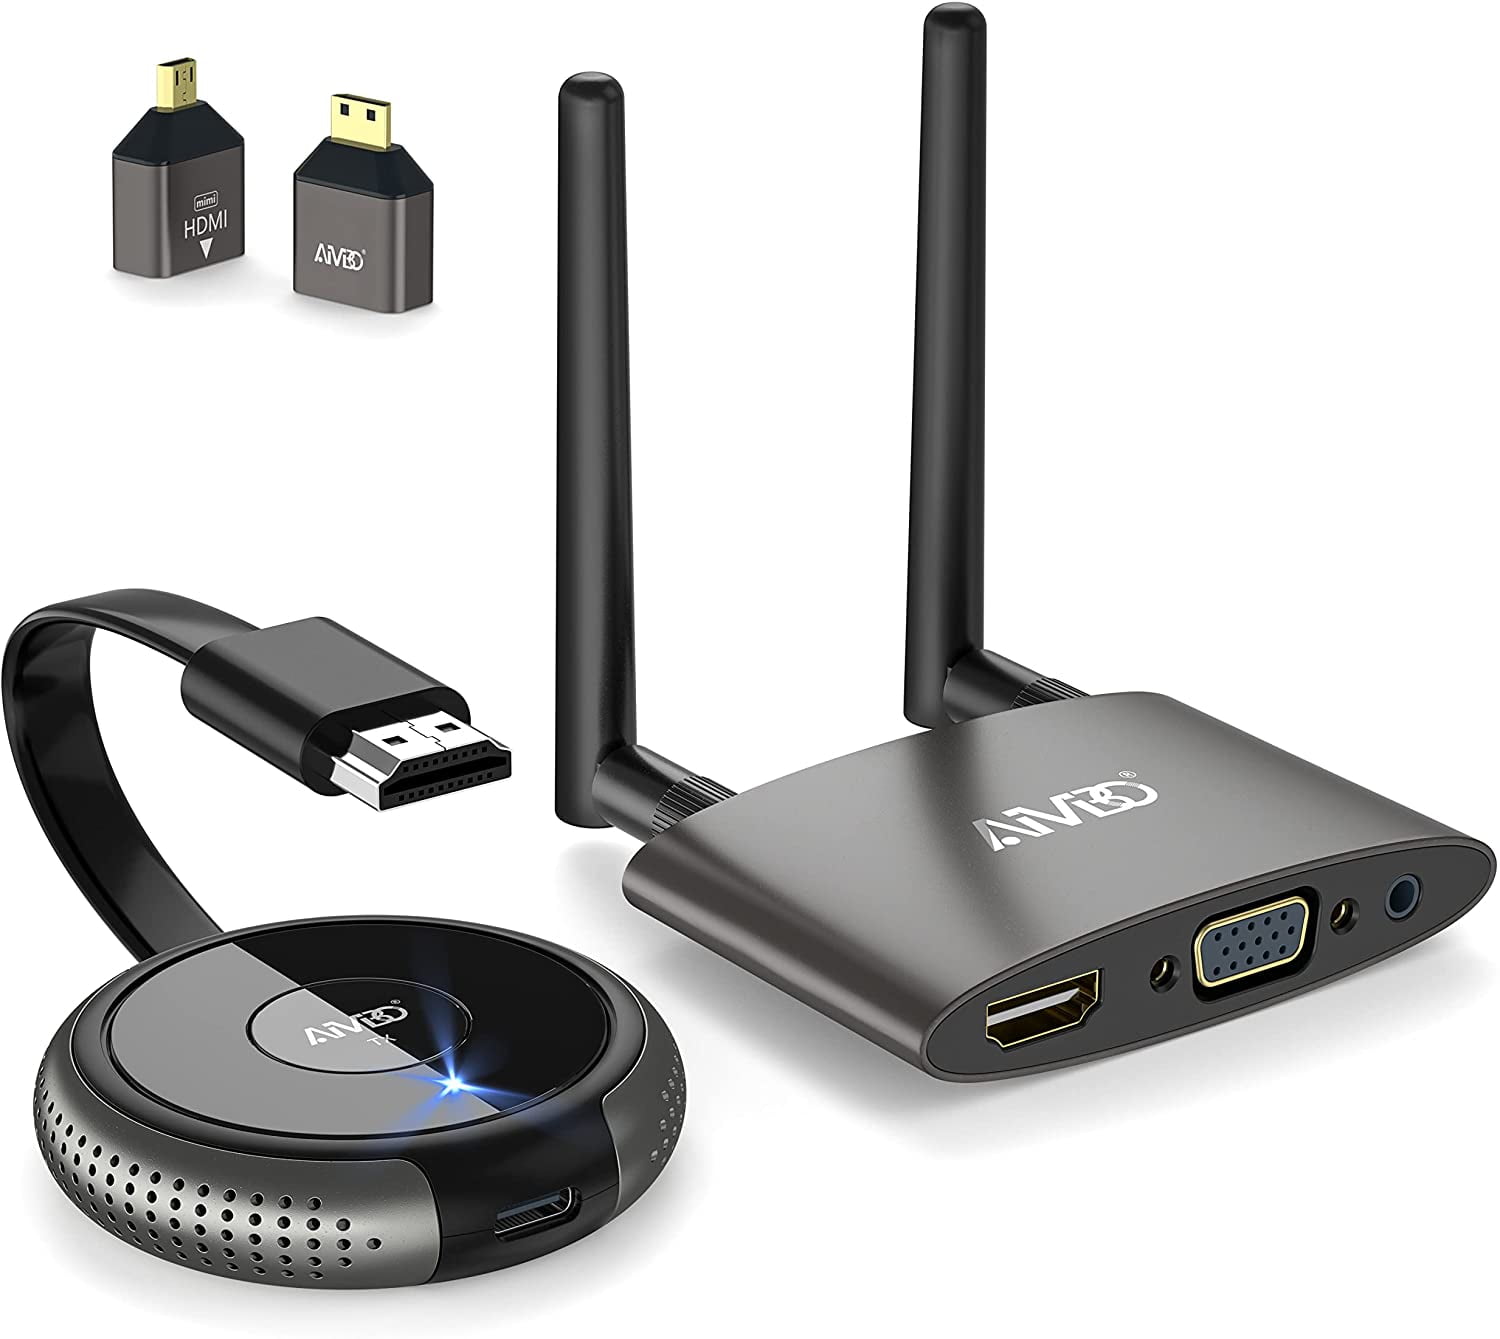 Wireless HDMI Transmitter and Receiver, Ultra HD Wireless HDMI Extender Streaming Video Audio from PC,Laptop,Phone TV and Projector,The Projector Adapter for TIKTOK/Neflix/Conferences/Wedding Live - Walmart.com